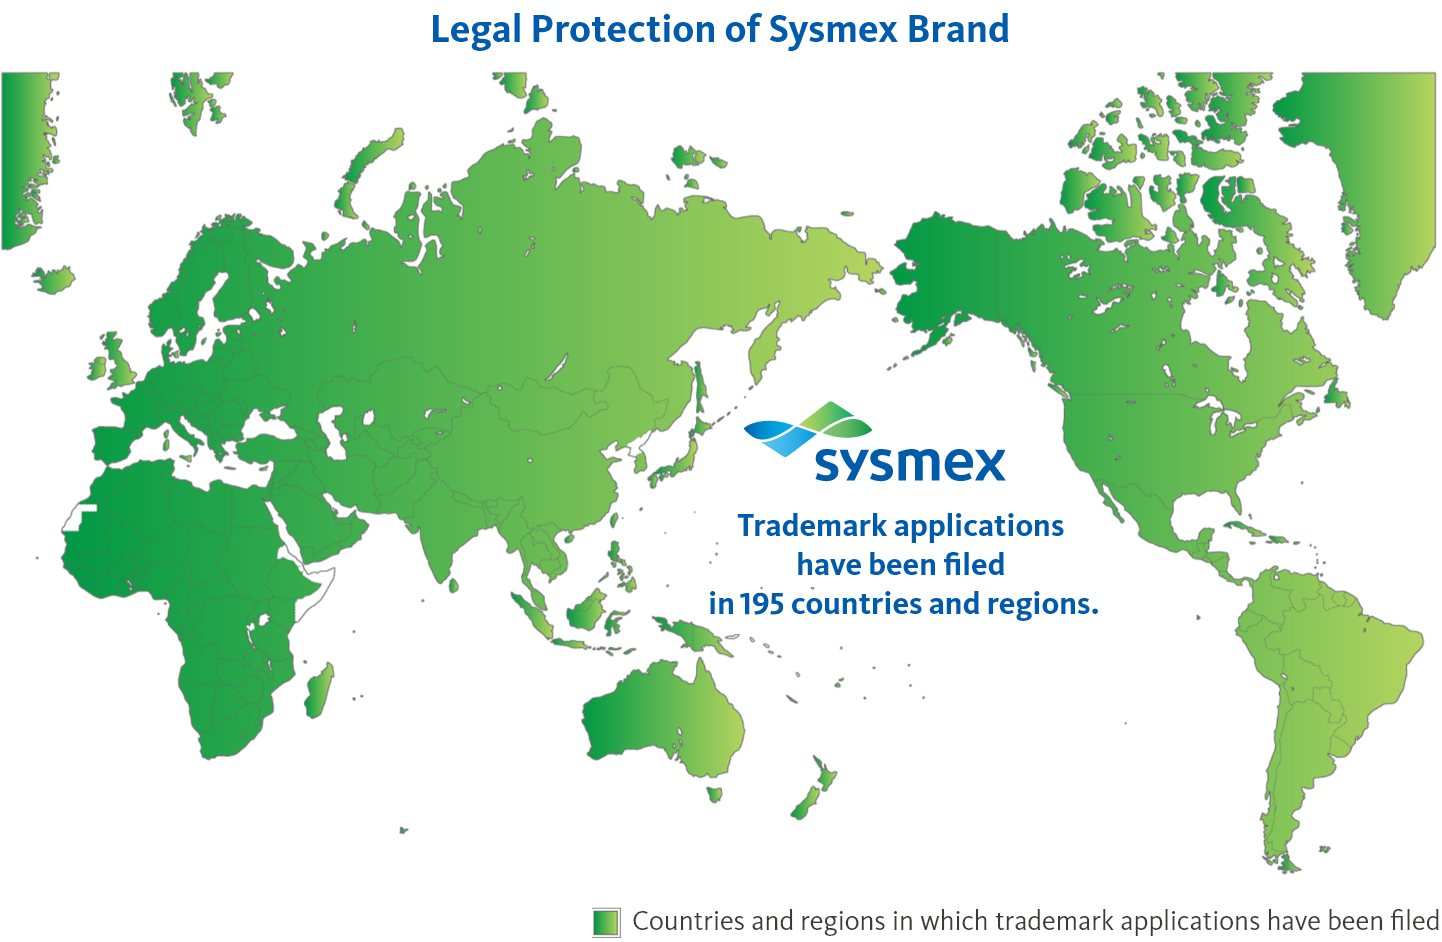 Legal Protection of Sysmex Brand